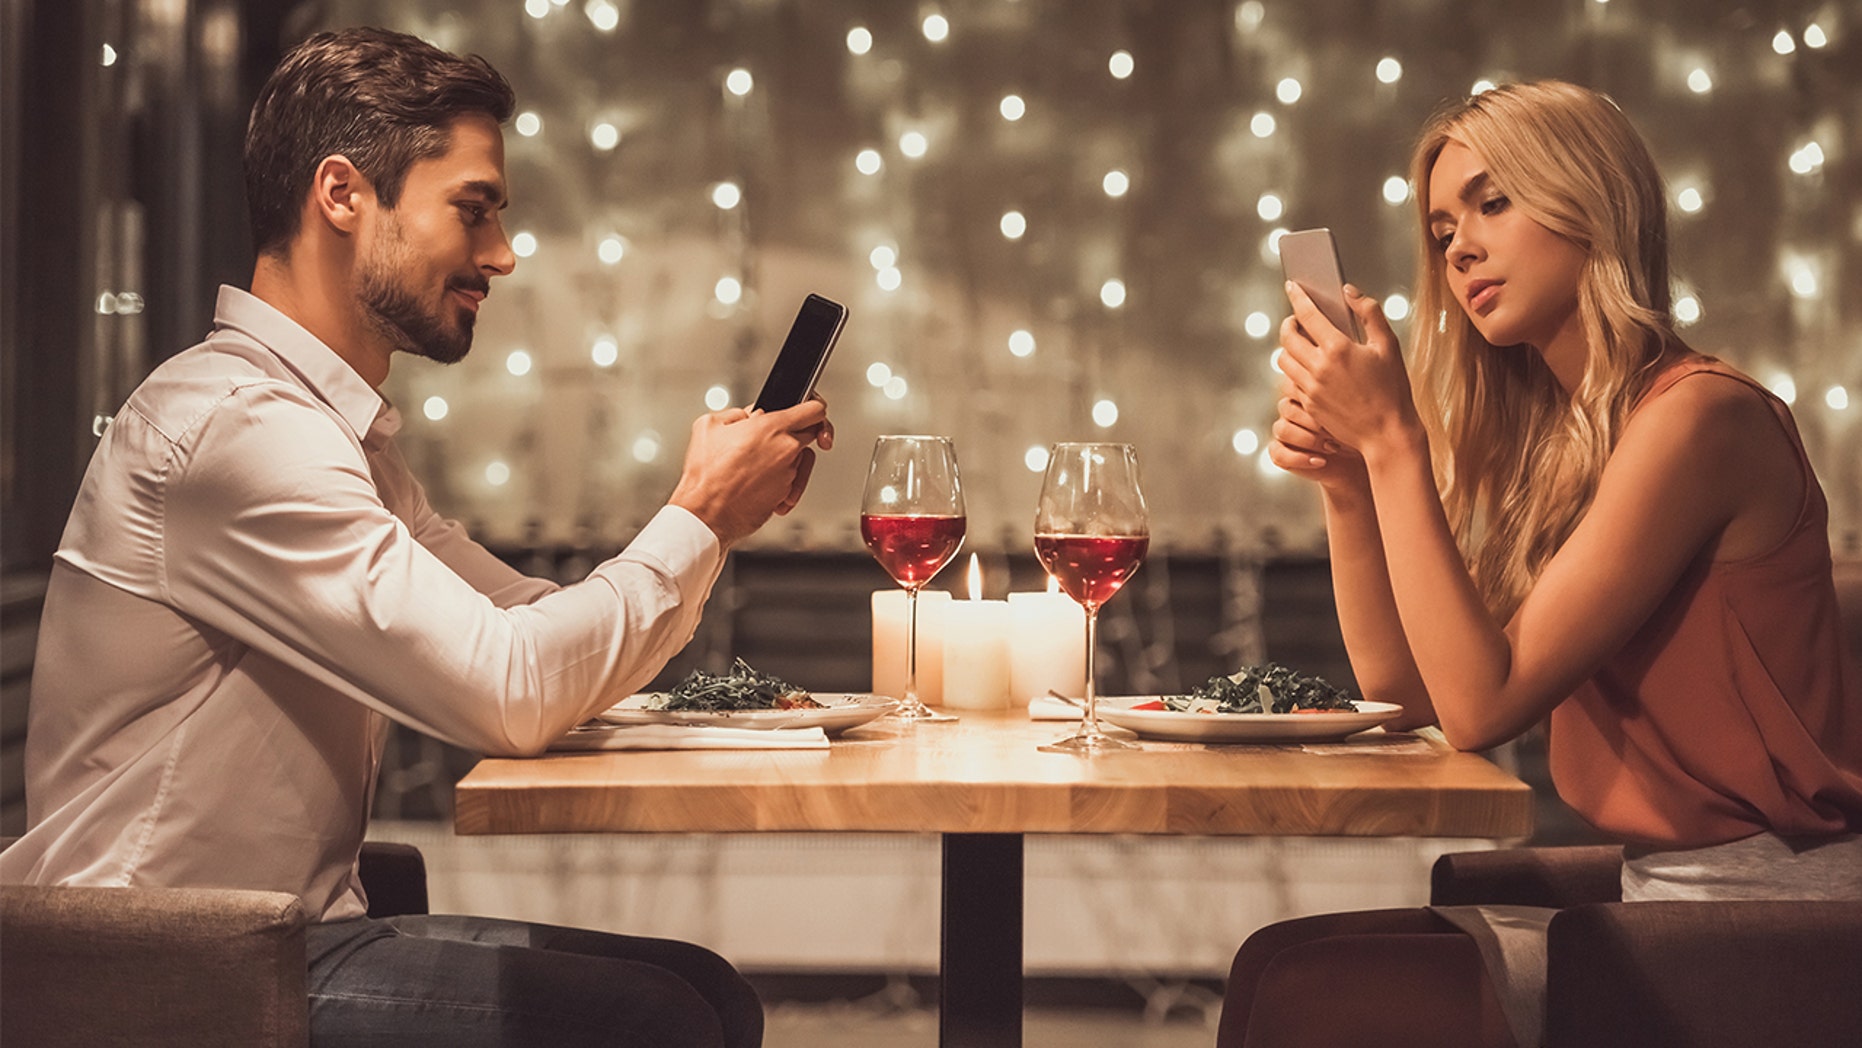 Bizarre dating trends to watch out for